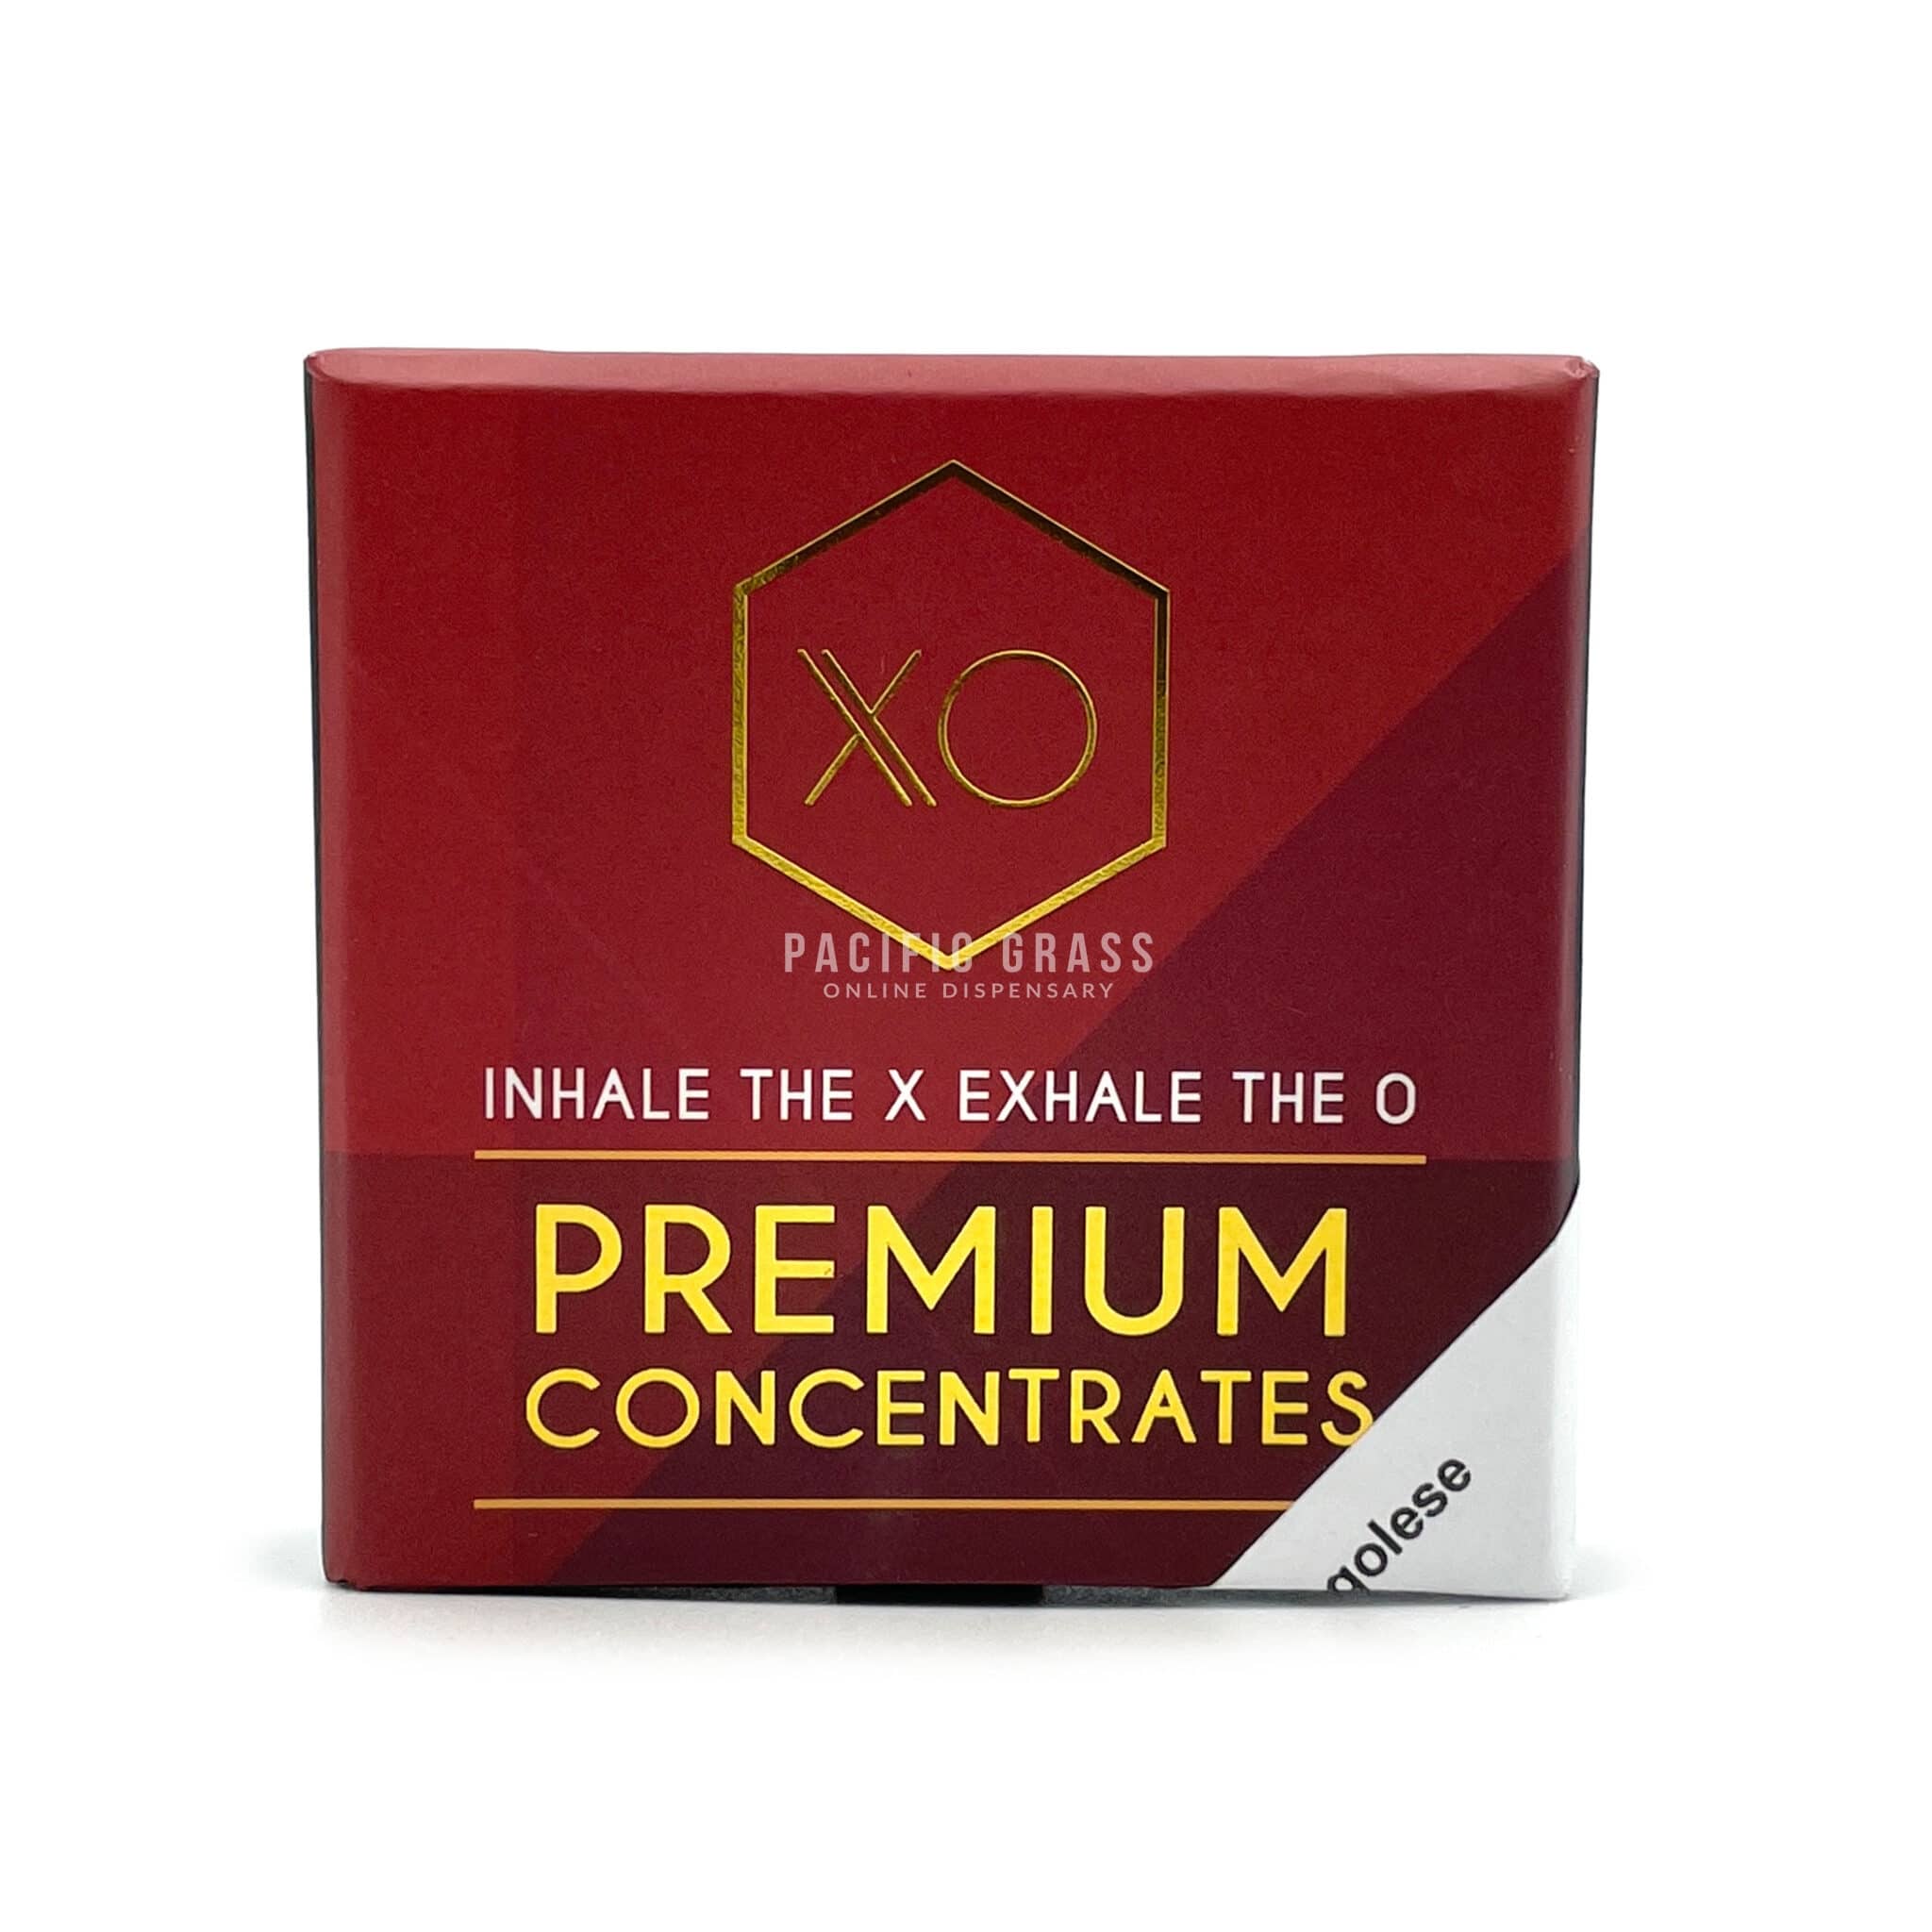 Xo Premium Concentrates – Shatter (2g)